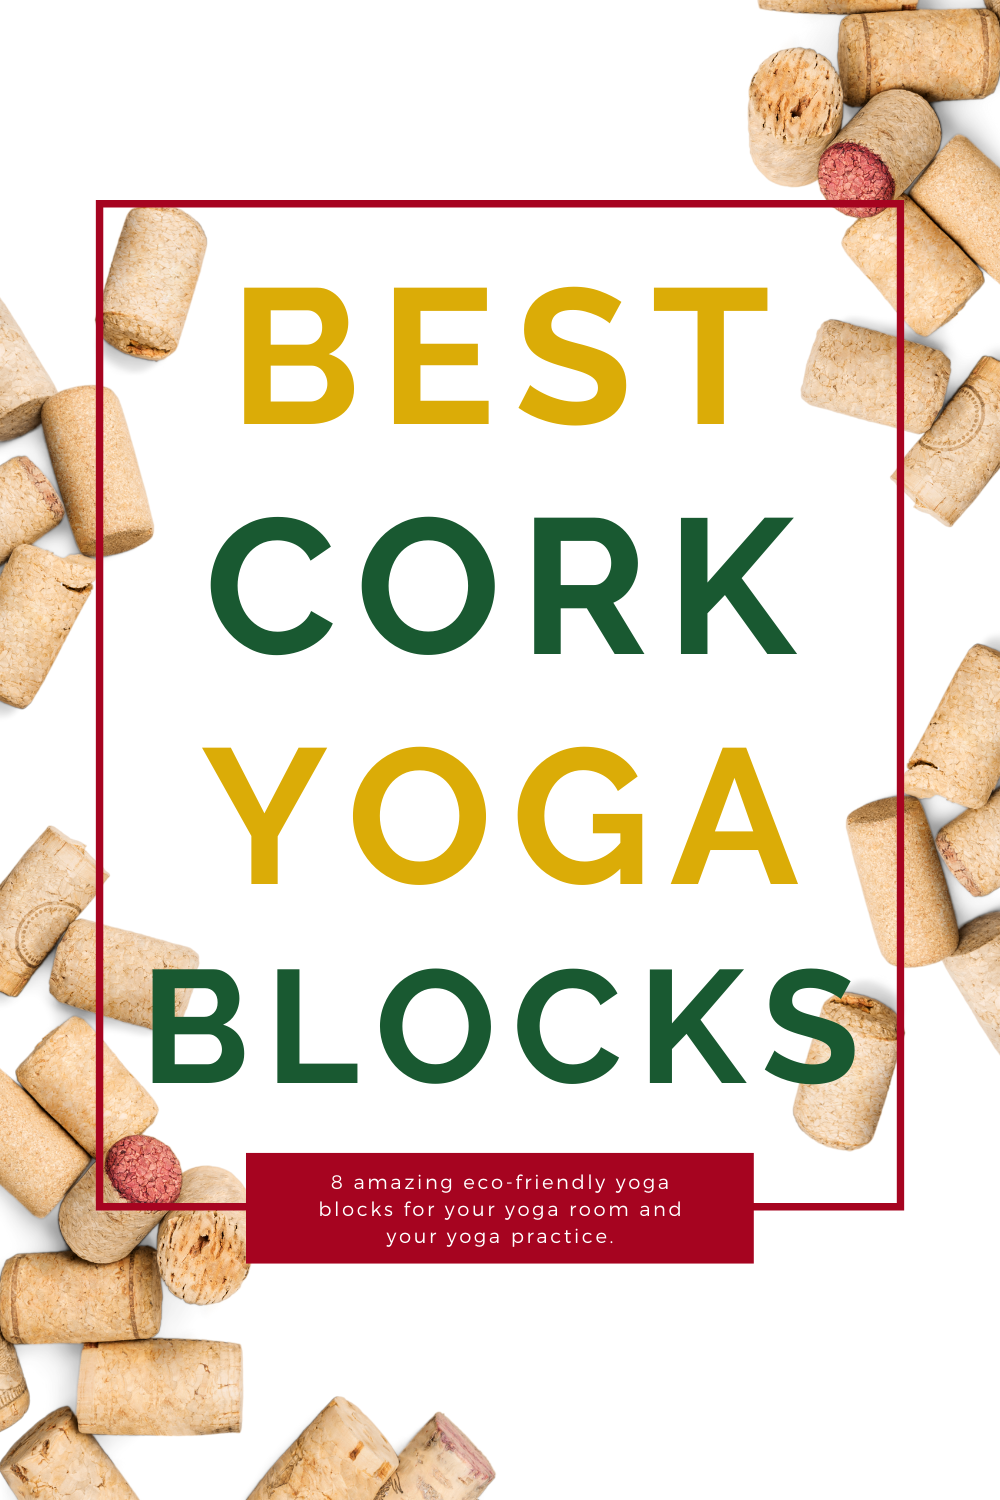 Best Cork Yoga Blocks. The best eco-friendly yoga blocks are made of cork, bamboo, or upcycled. All these yoga brands produce sustainable cork yoga blocks that are durable.